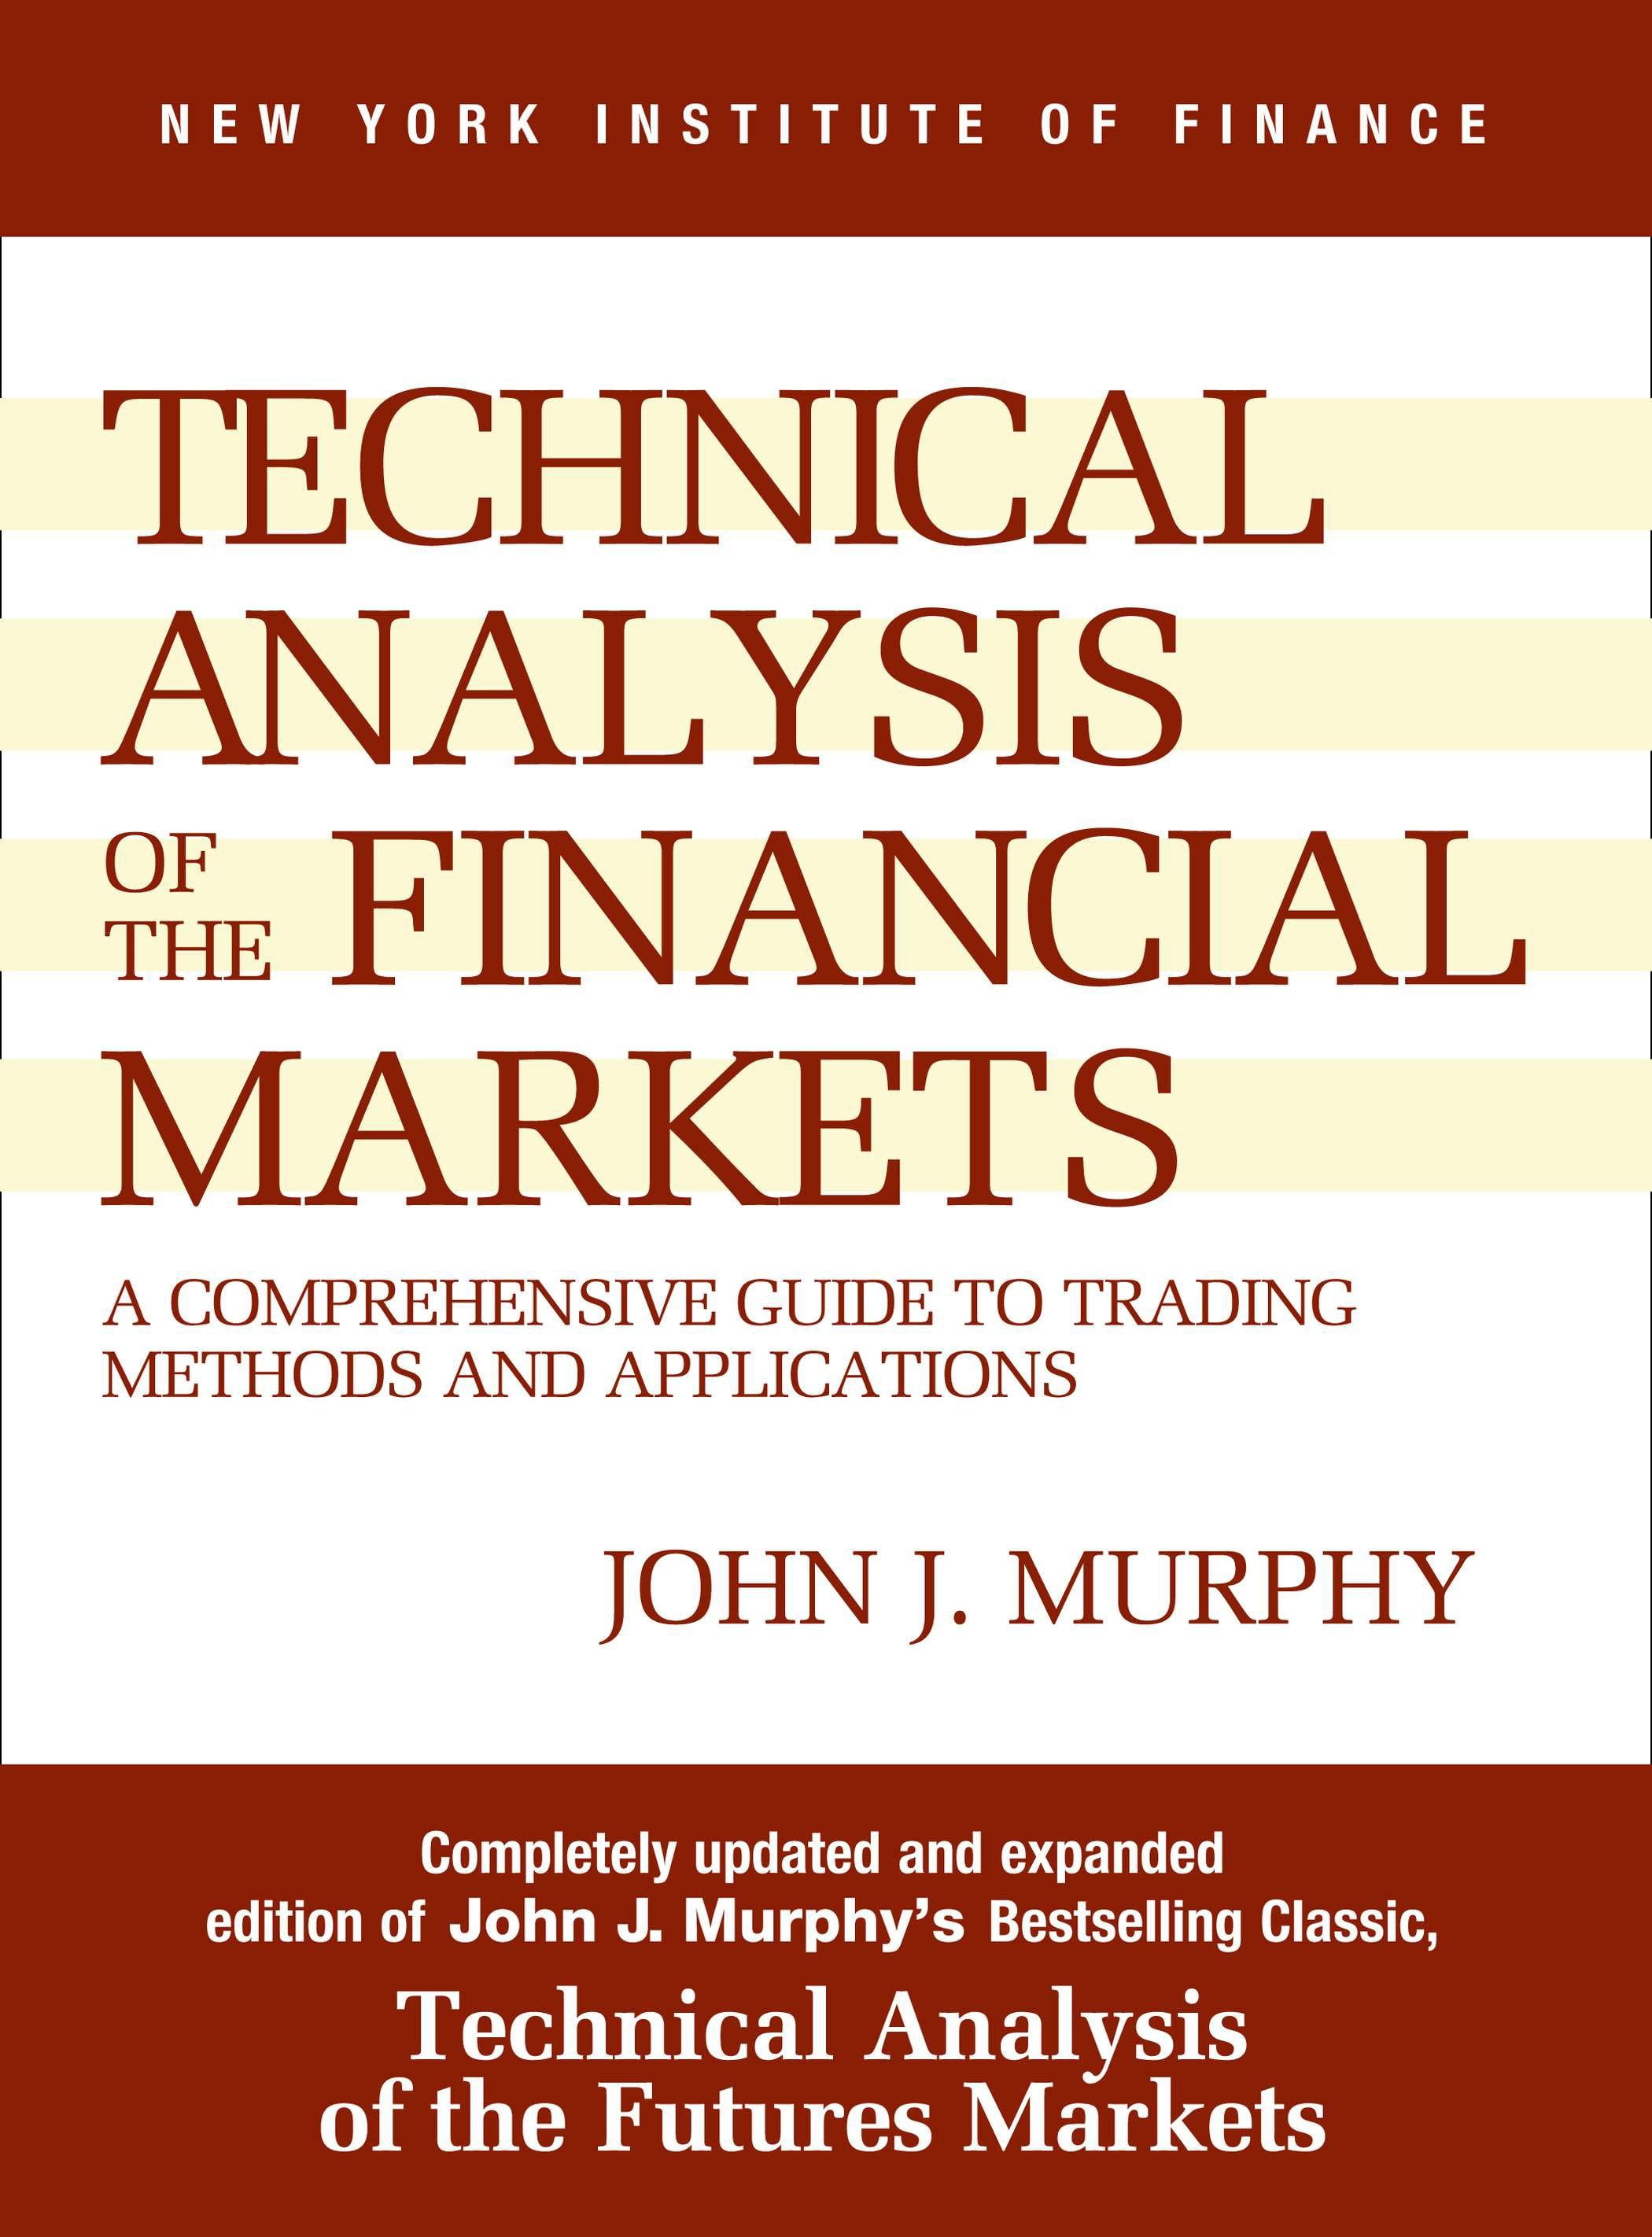 thesis topics financial markets